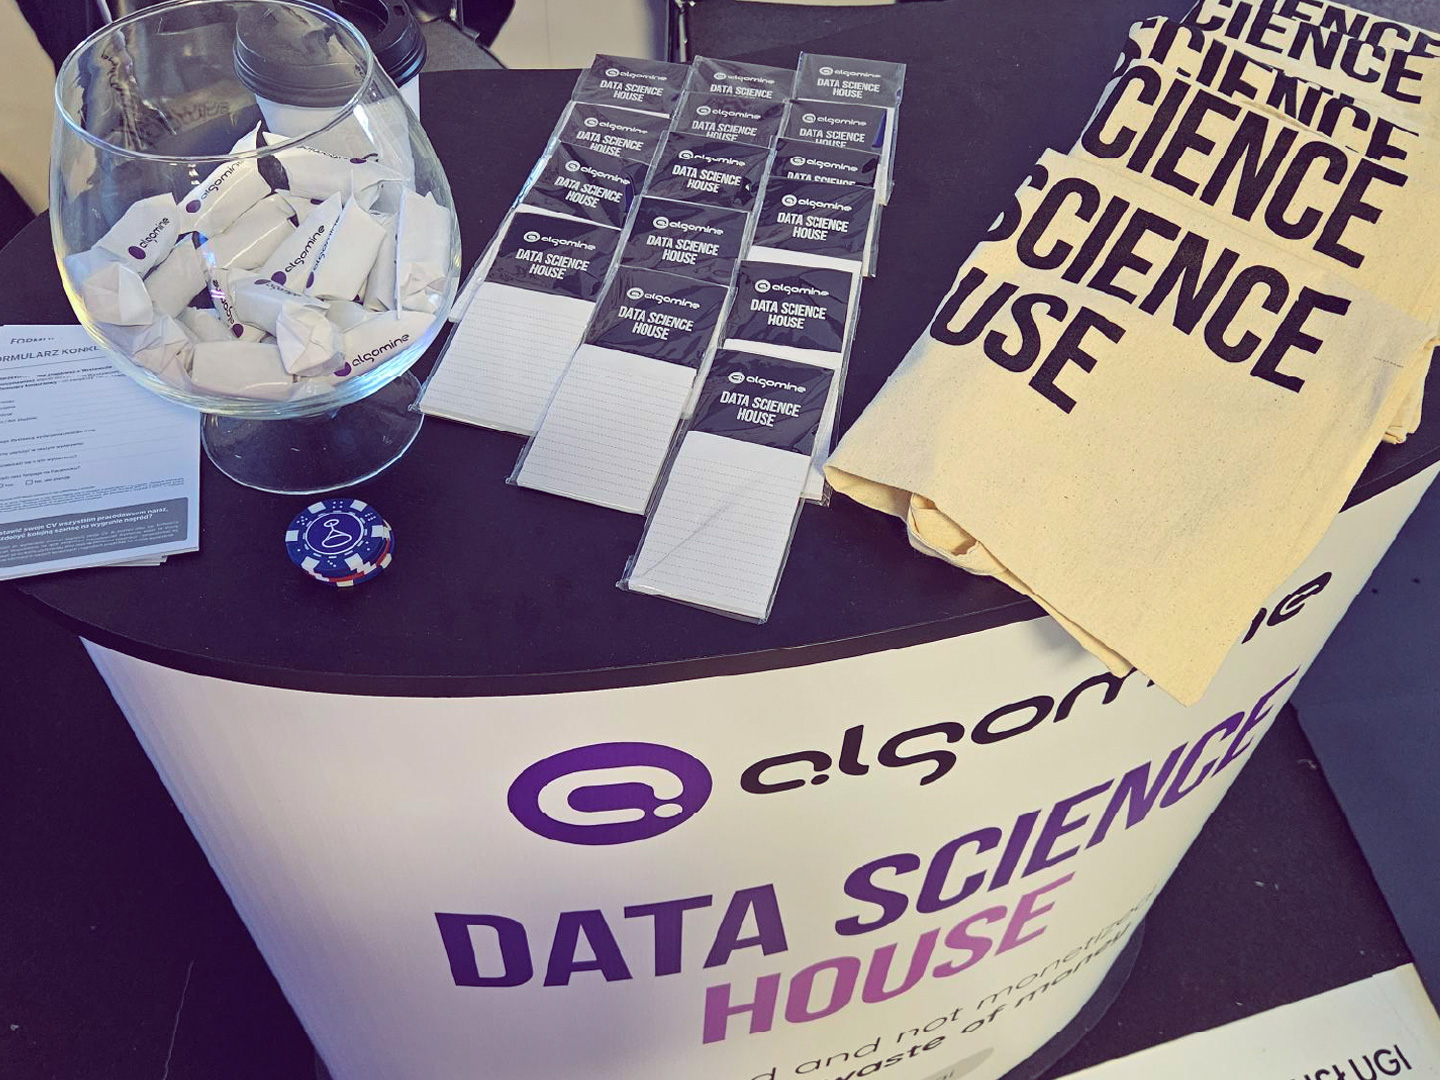 Algomine booth at a conference